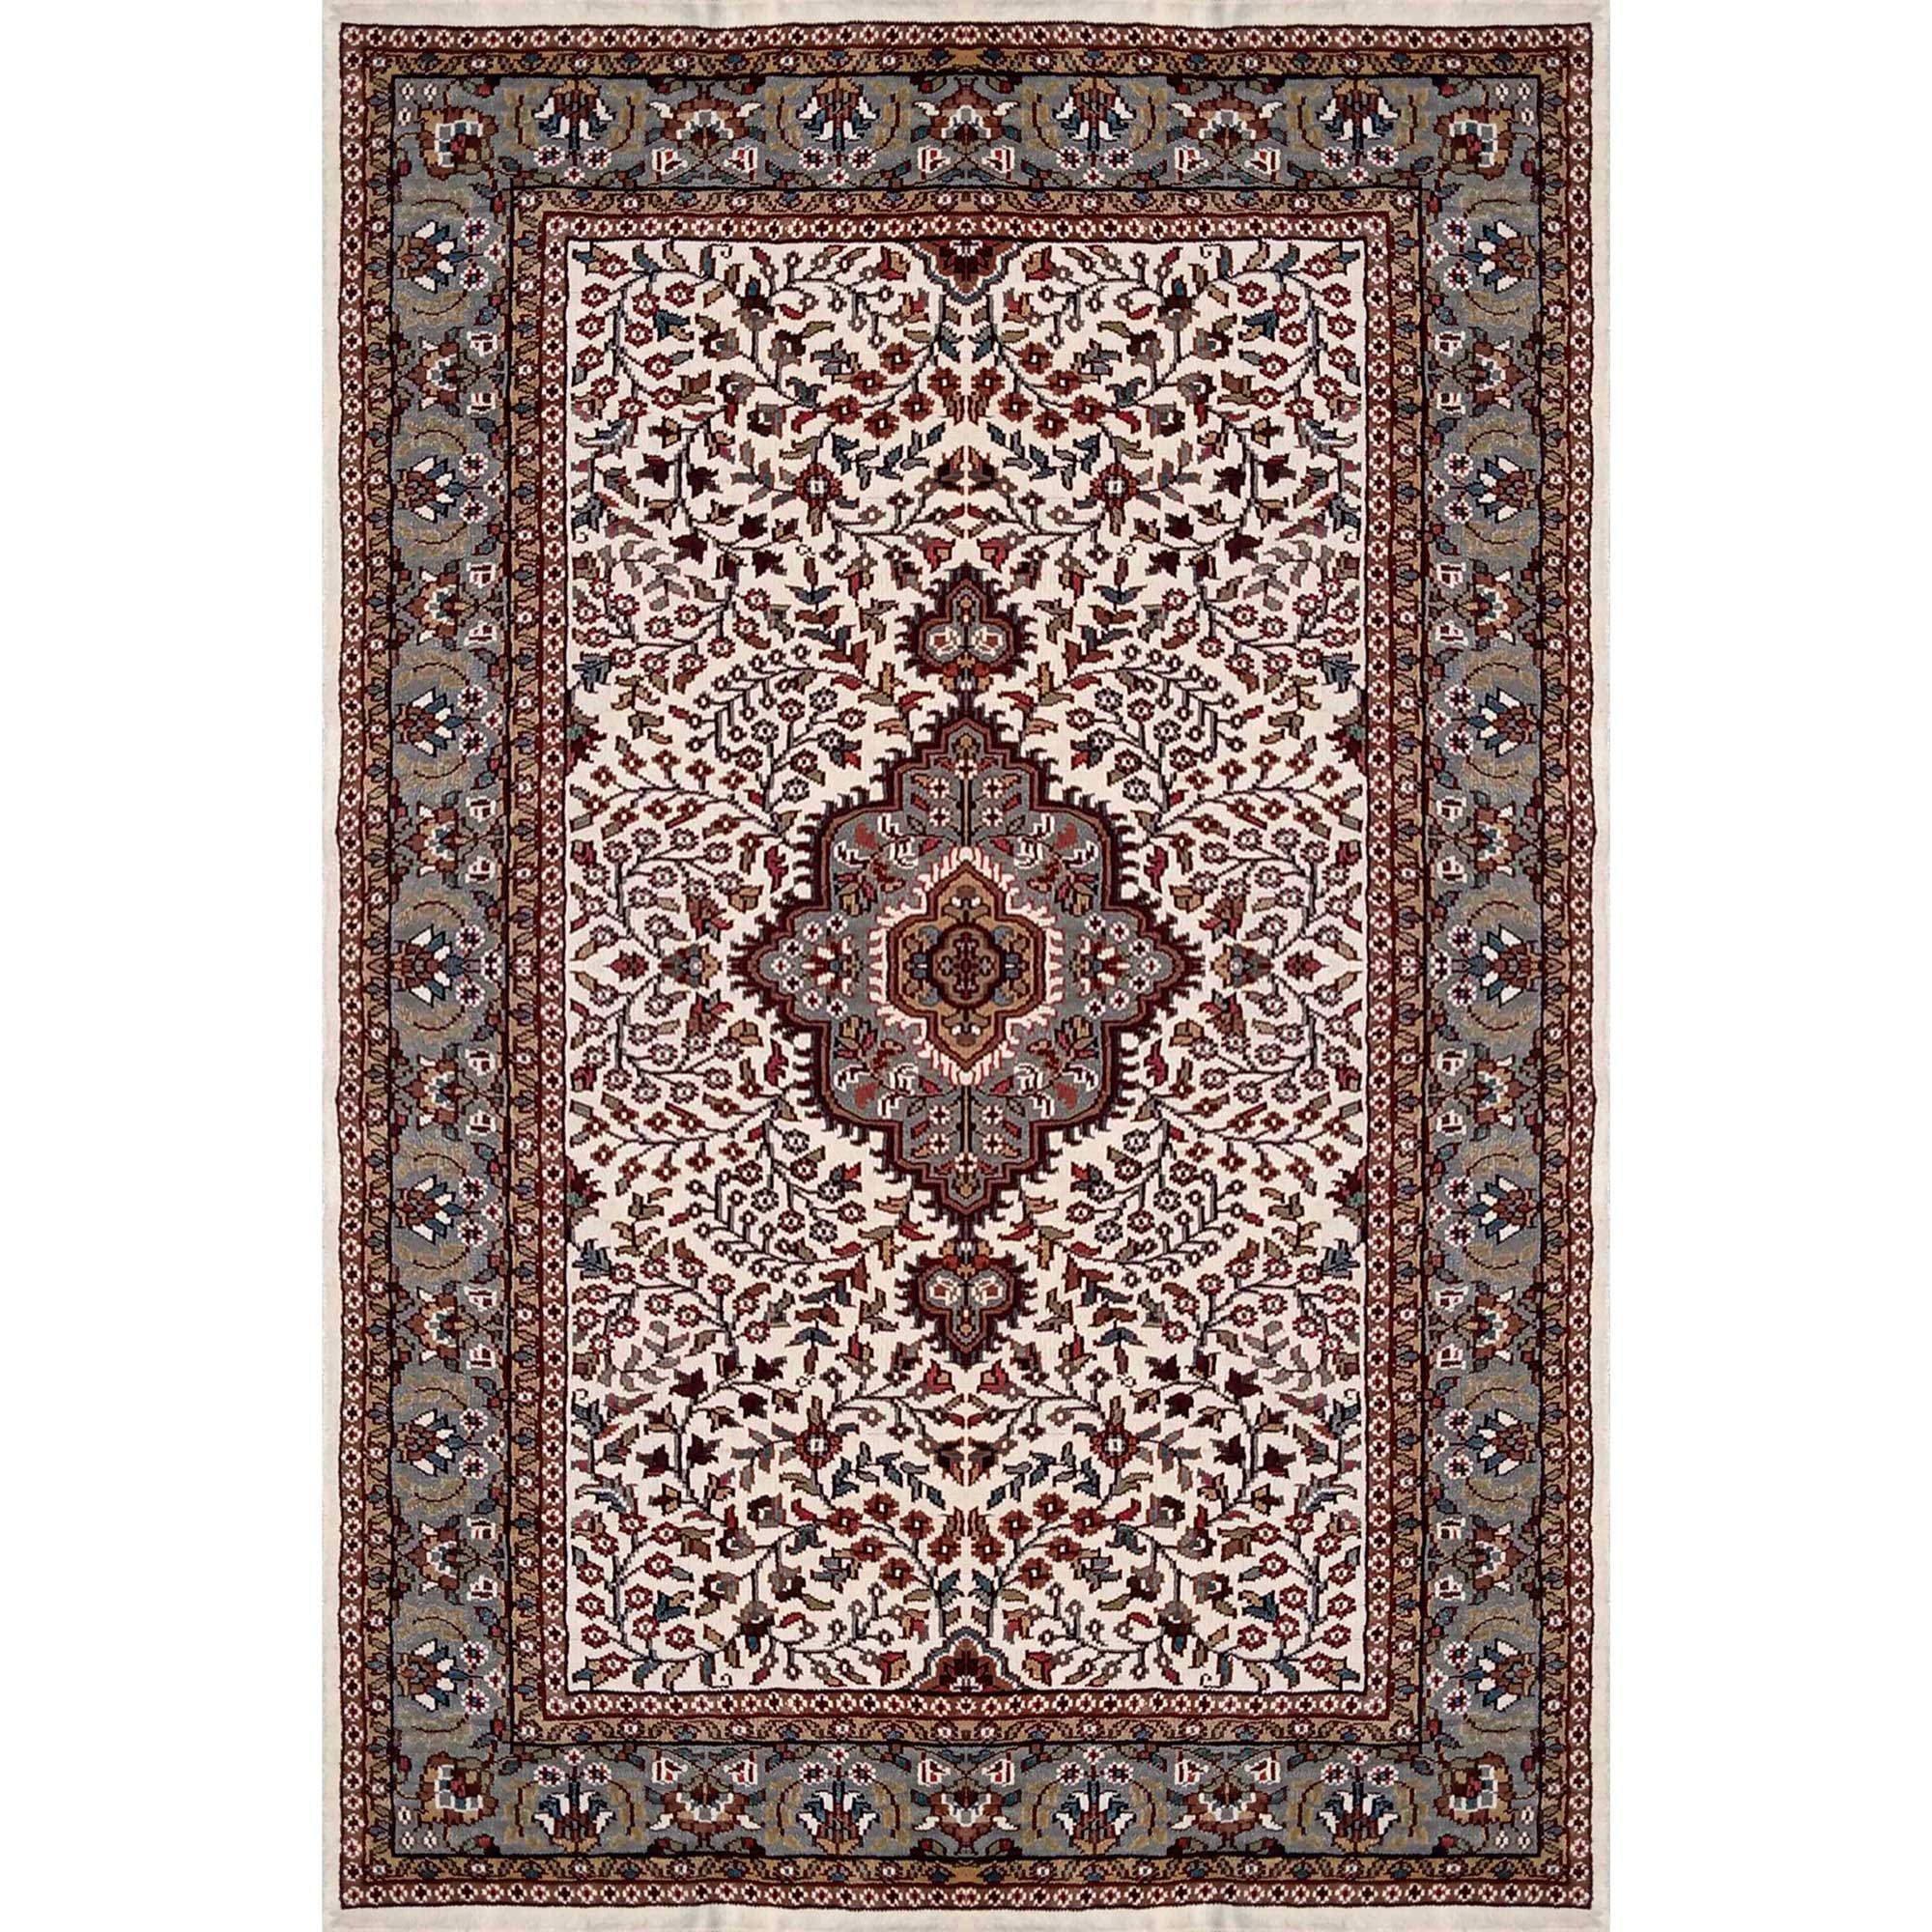 4x6 Indian Hand Knotted Wool Area Rug Oriental Rugs Medallion Luxury Home Carpet 